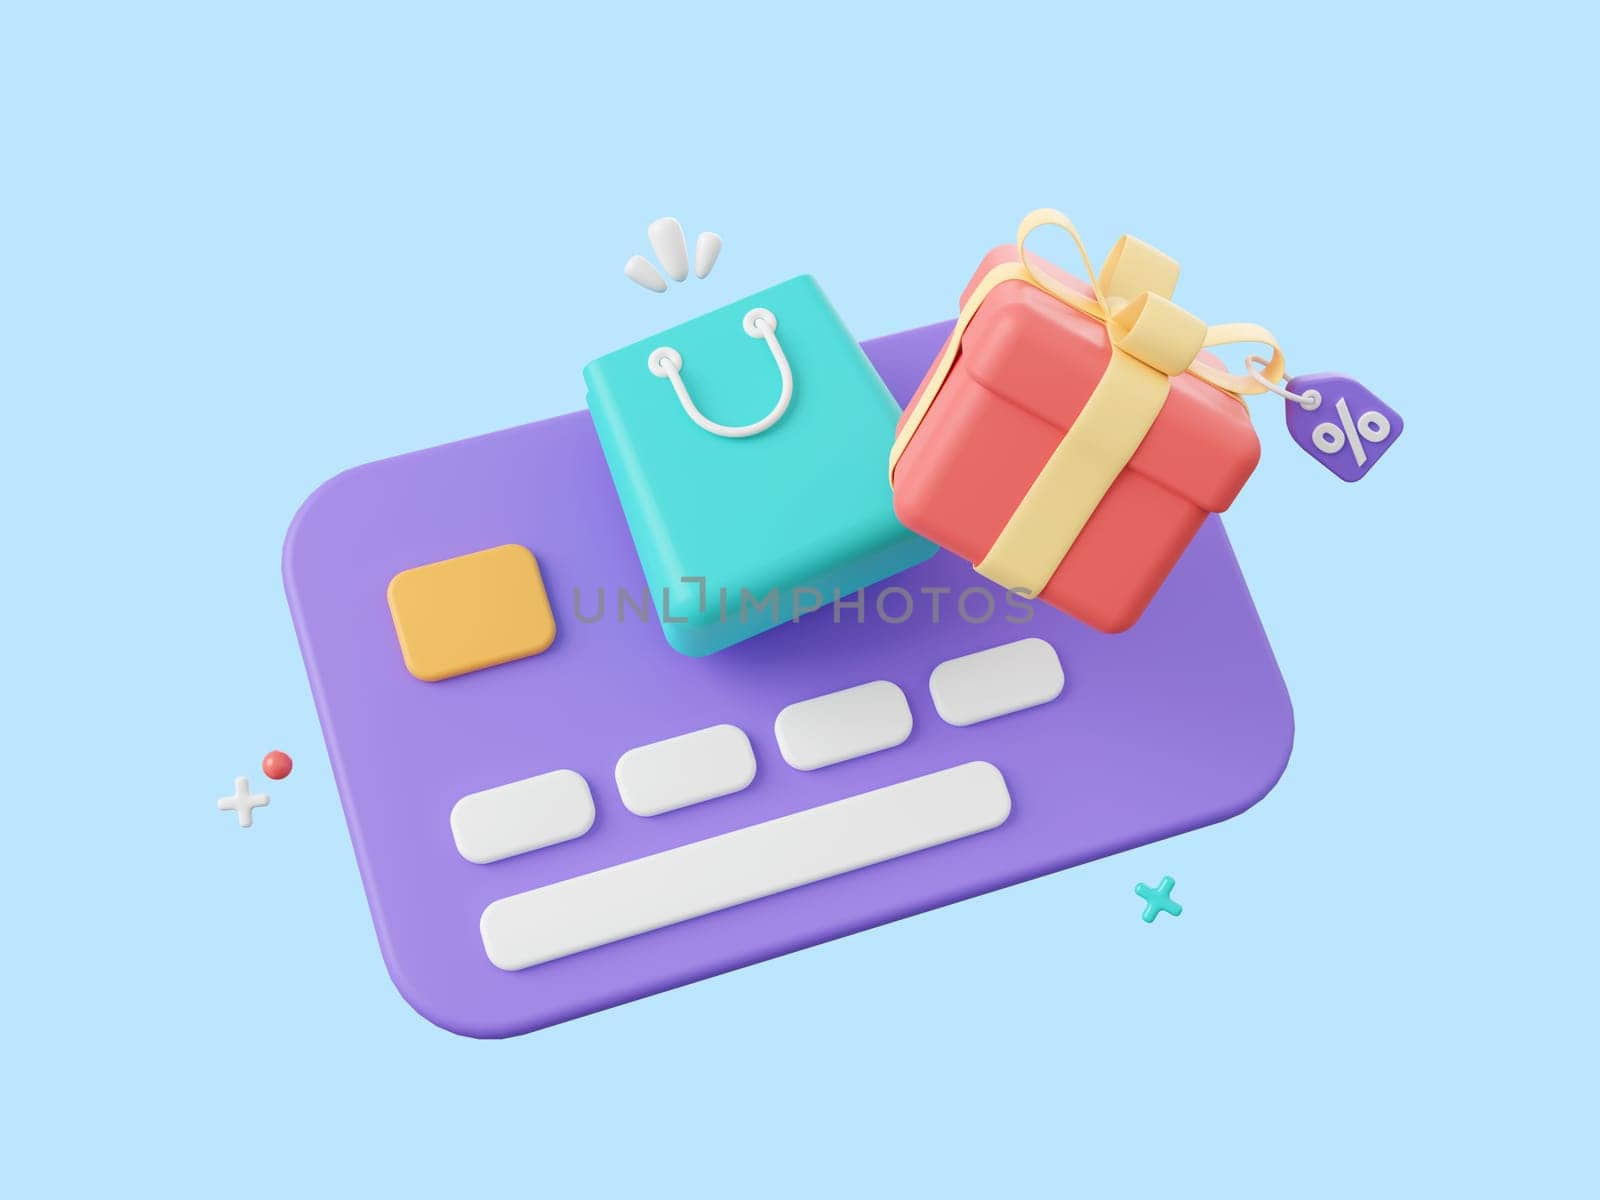 3d cartoon design illustration of Credit cards with shopping bag and gift box, Shopping online and payments by credit card. by nutzchotwarut